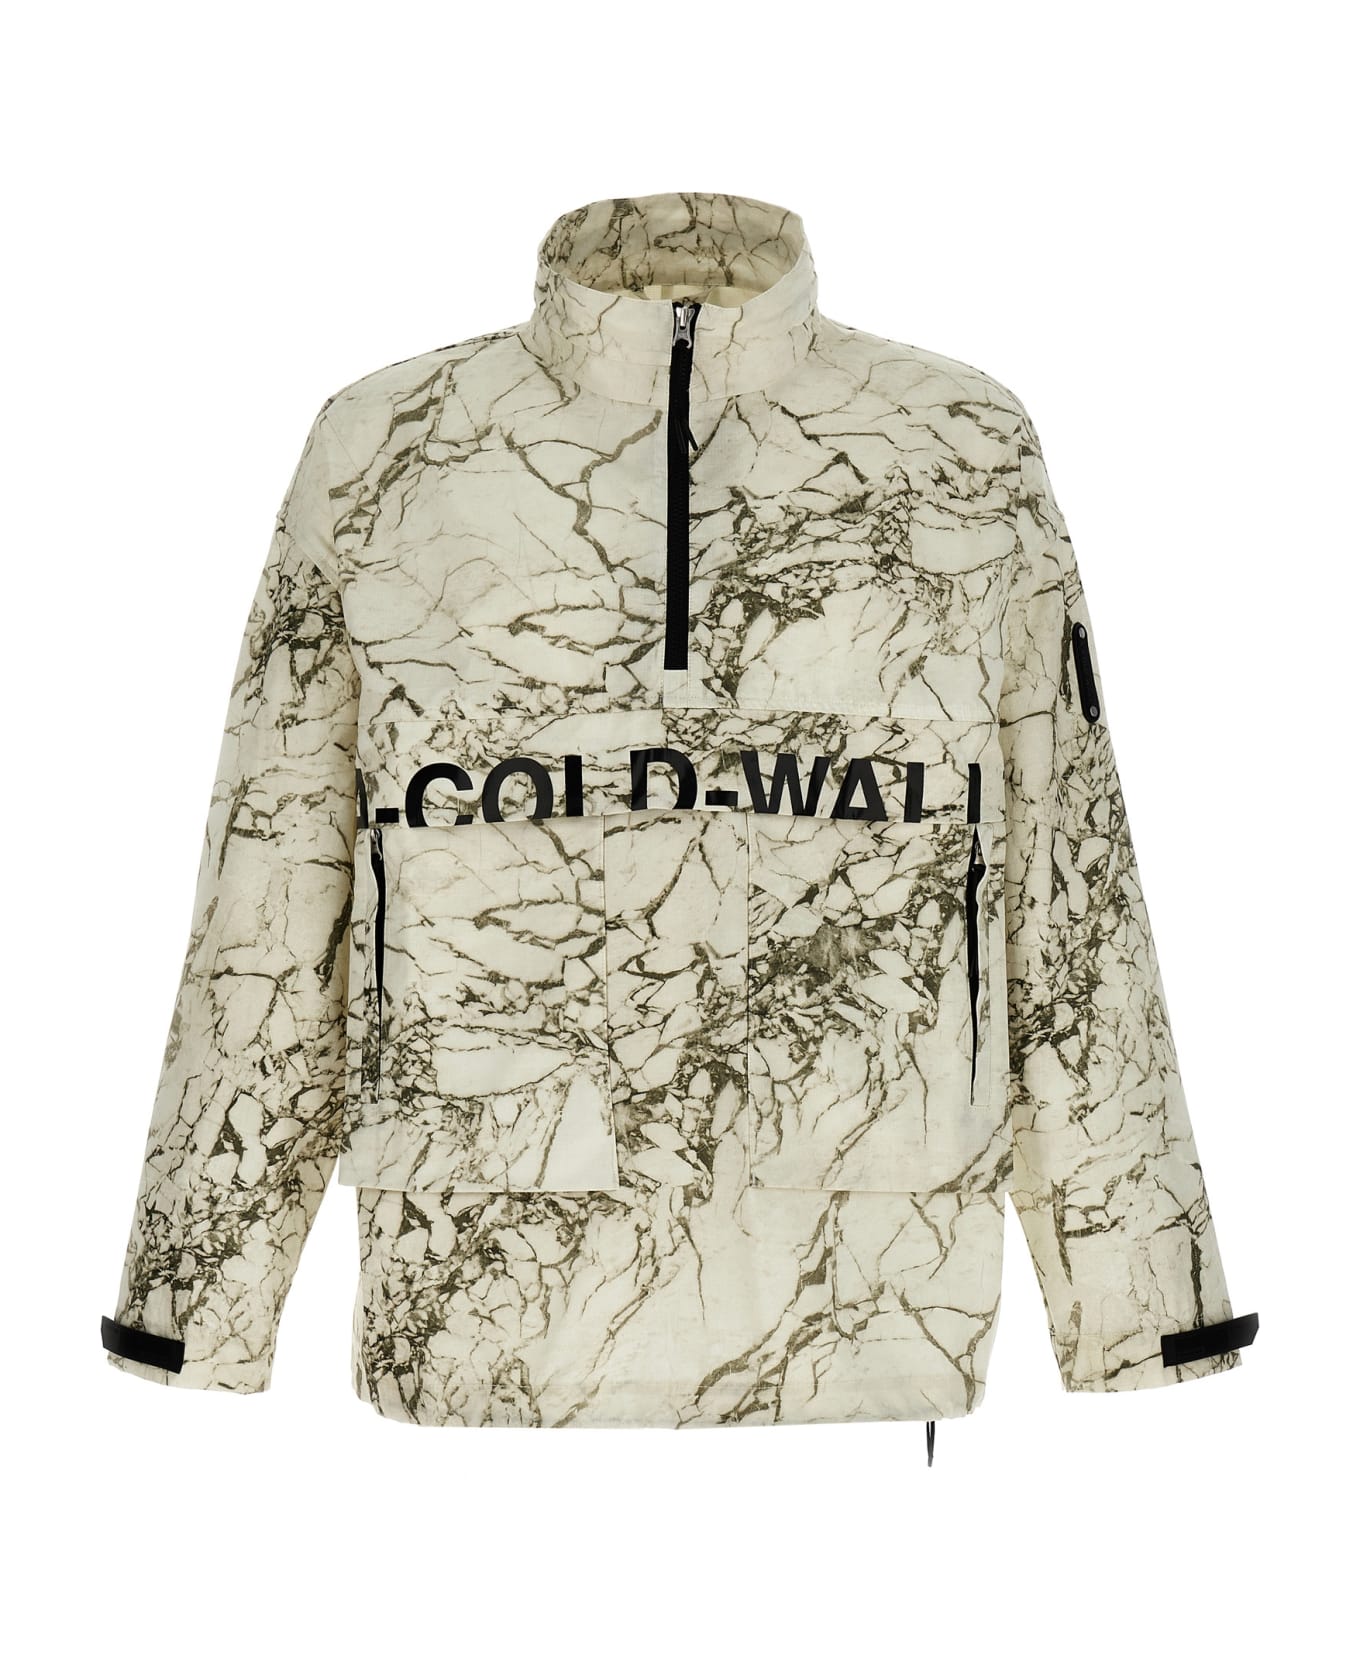 A-COLD-WALL Anorak 'overset Tech' - Multicolor